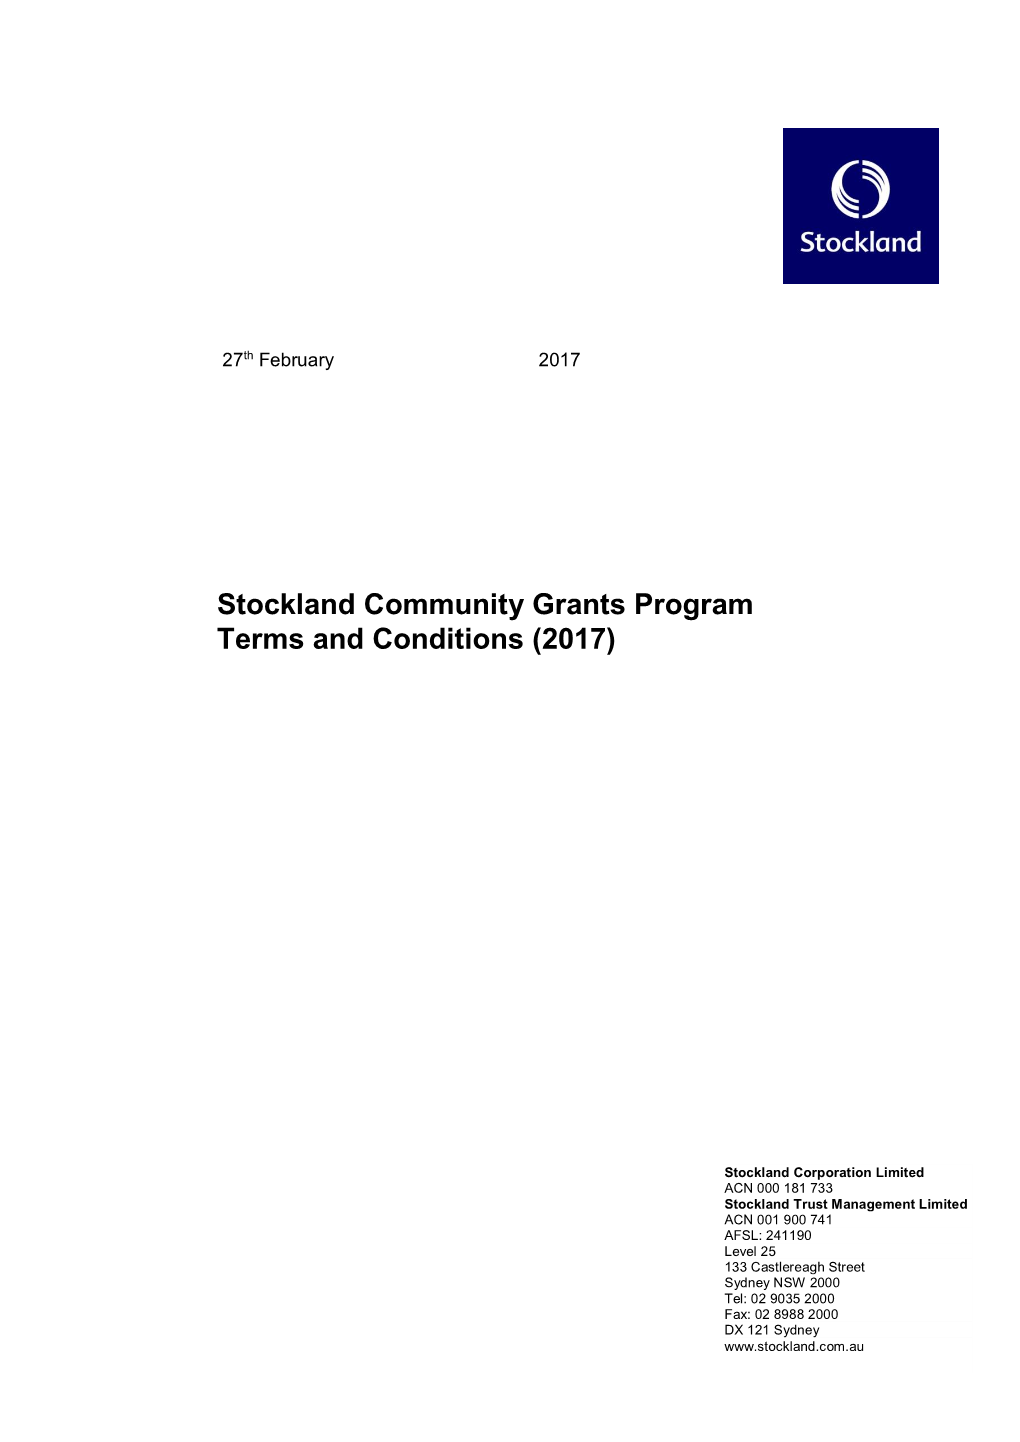 Stockland Community Grants Program Terms and Conditions (2017)